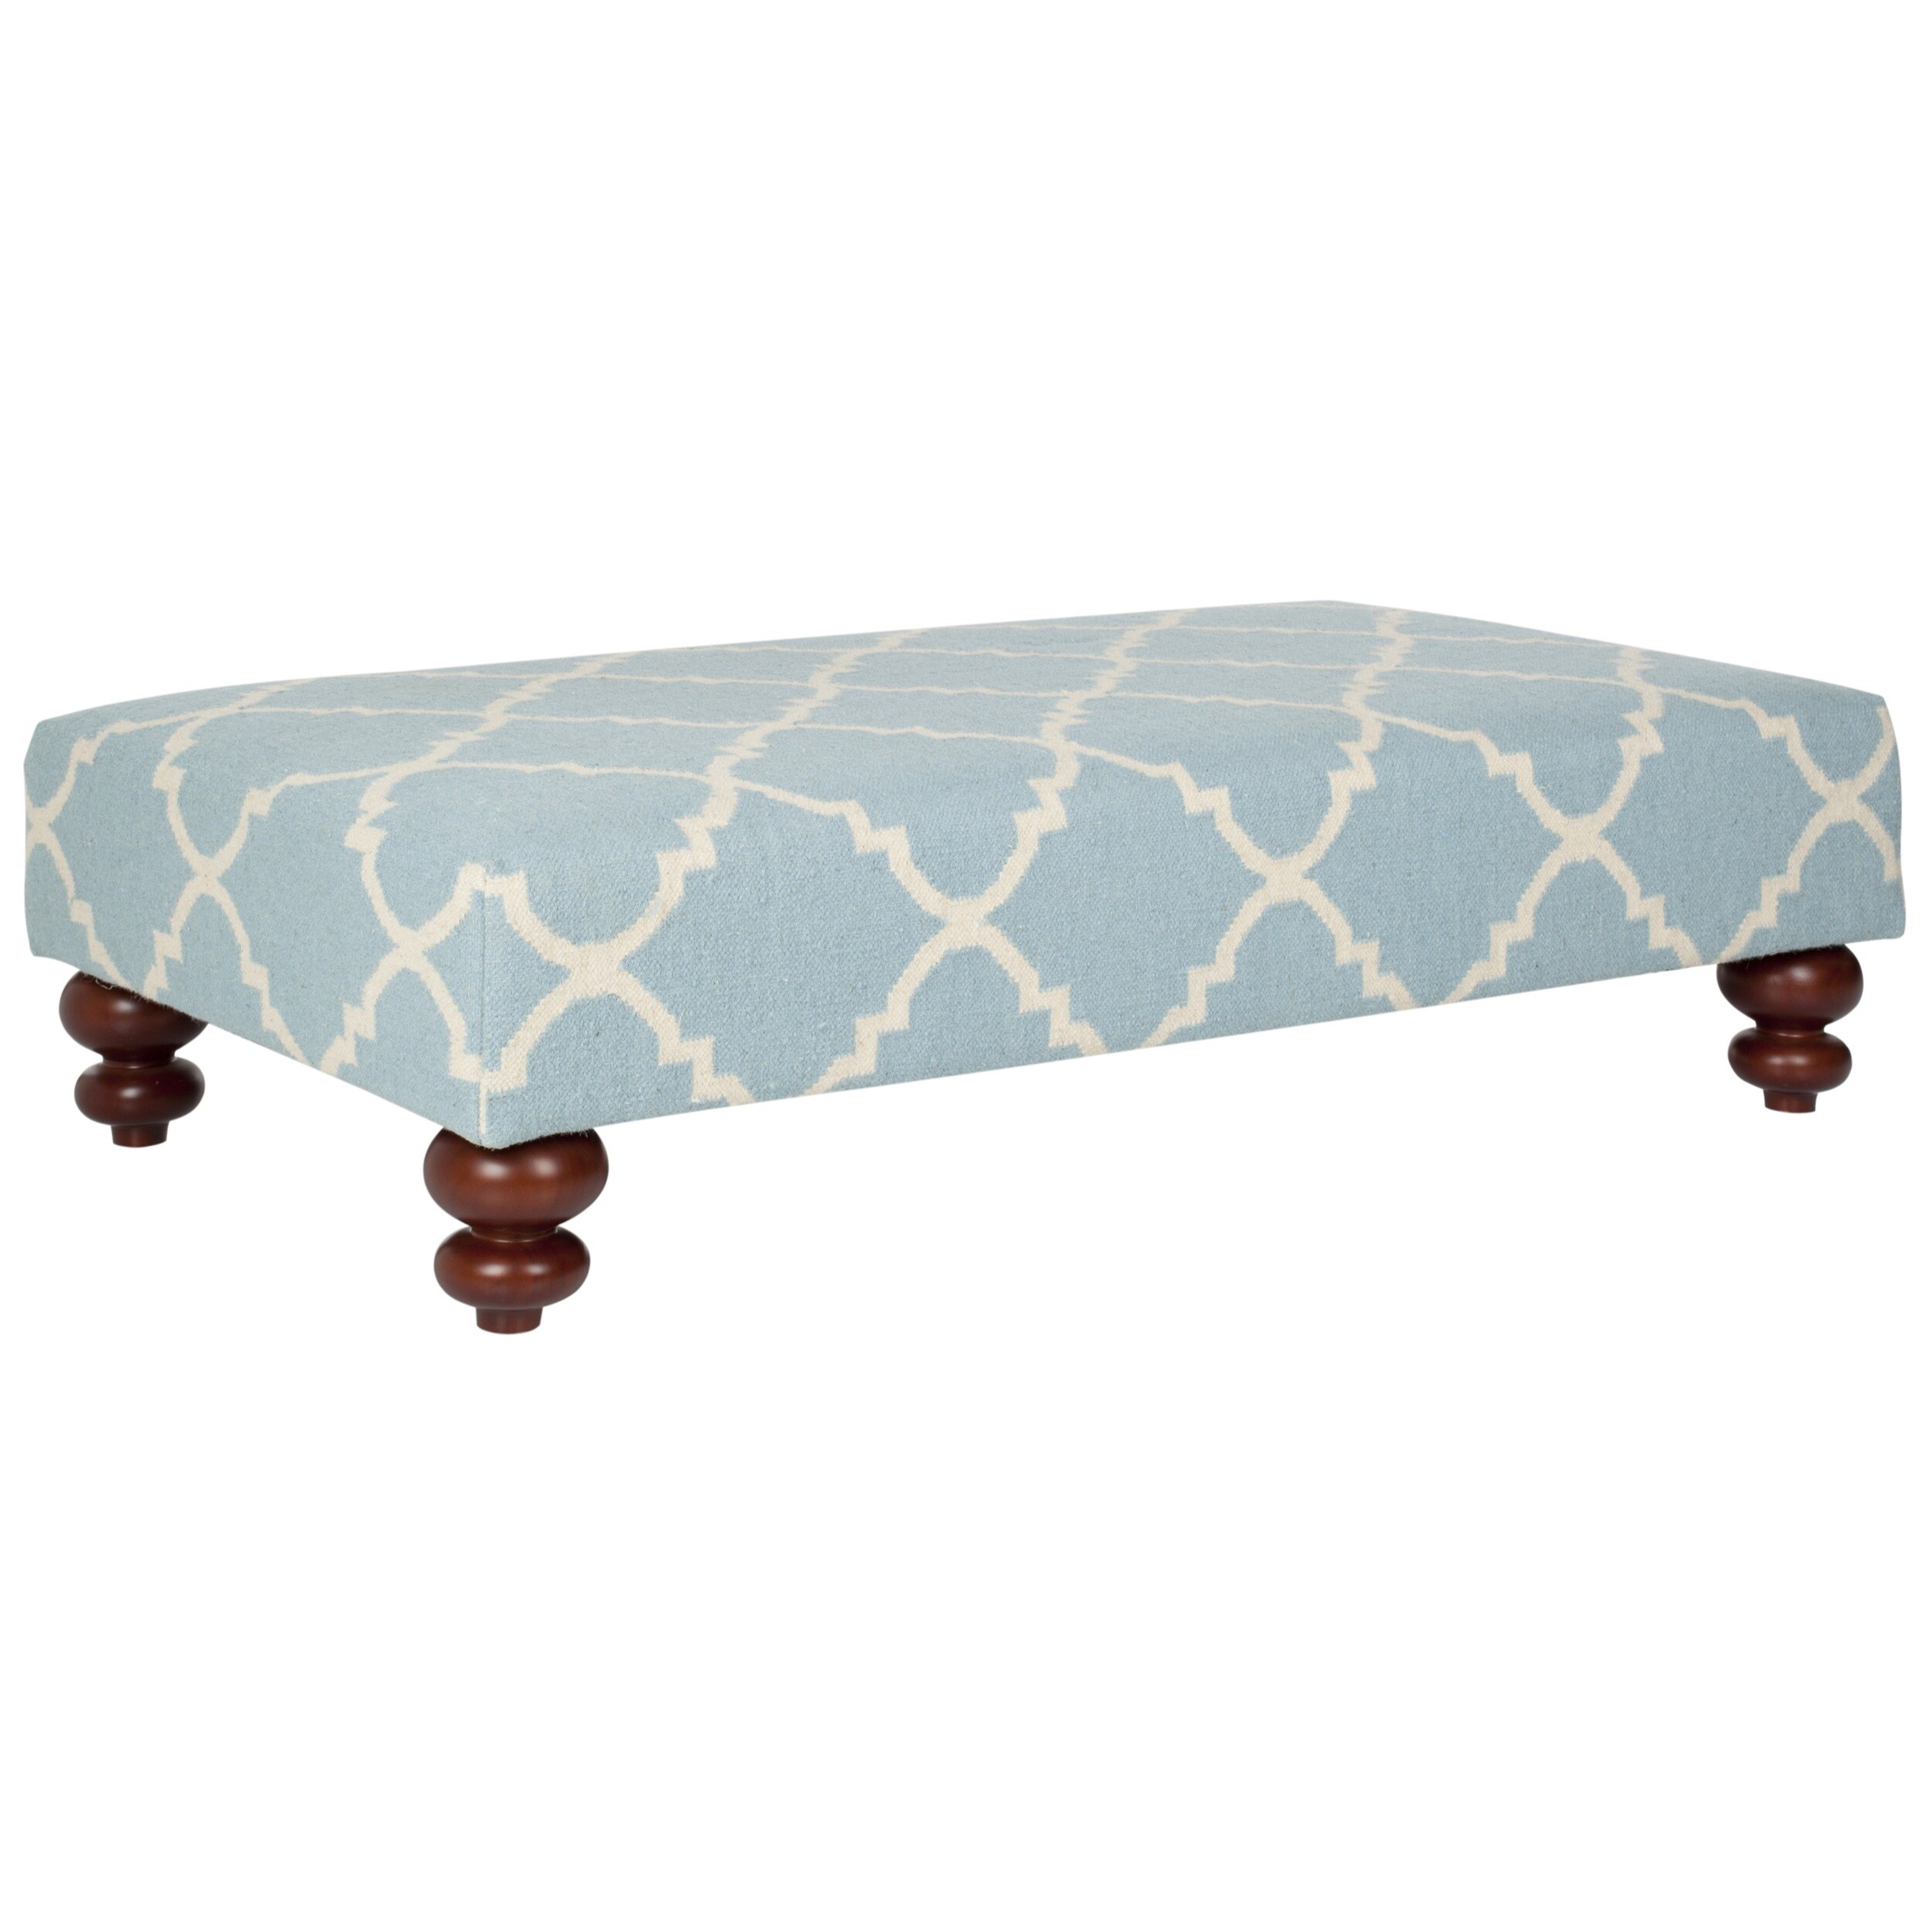 Safavieh Quatrefoil Light Blue Dhurrie Rug Ottoman (Light blue/ ivoryMaterials Birch wood, wool fabricFinish CherryDimensions 14.2 inches high x 53.9 inches wide x 30.7 inches deepThis product will ship to you in 1 box.Furniture arrives fully assembled